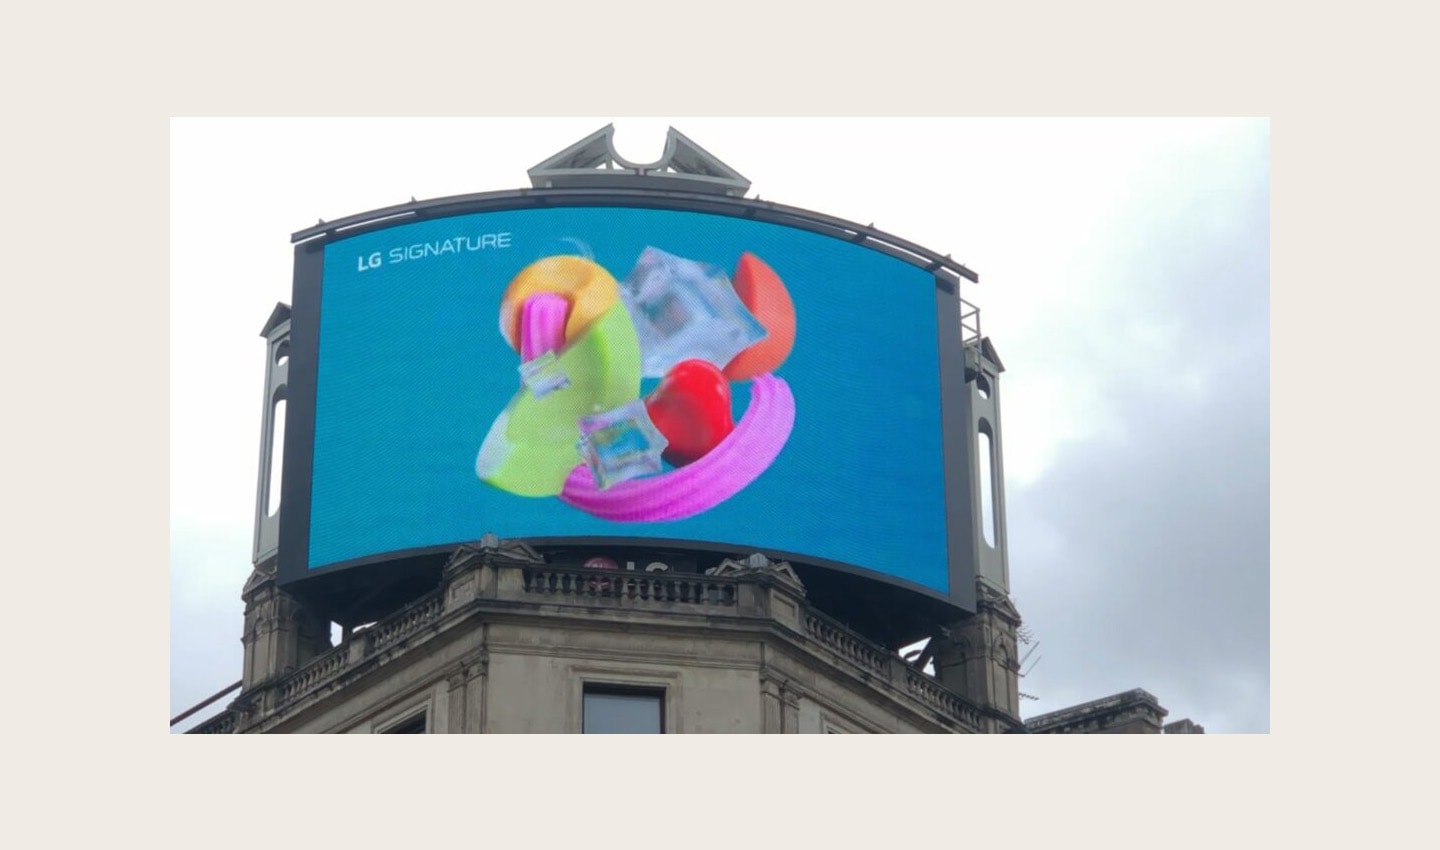 A close-up photo of LG's digital billboard in Piccadilly Circus, London with an animation representing LG SIGNATURE Refrigerator